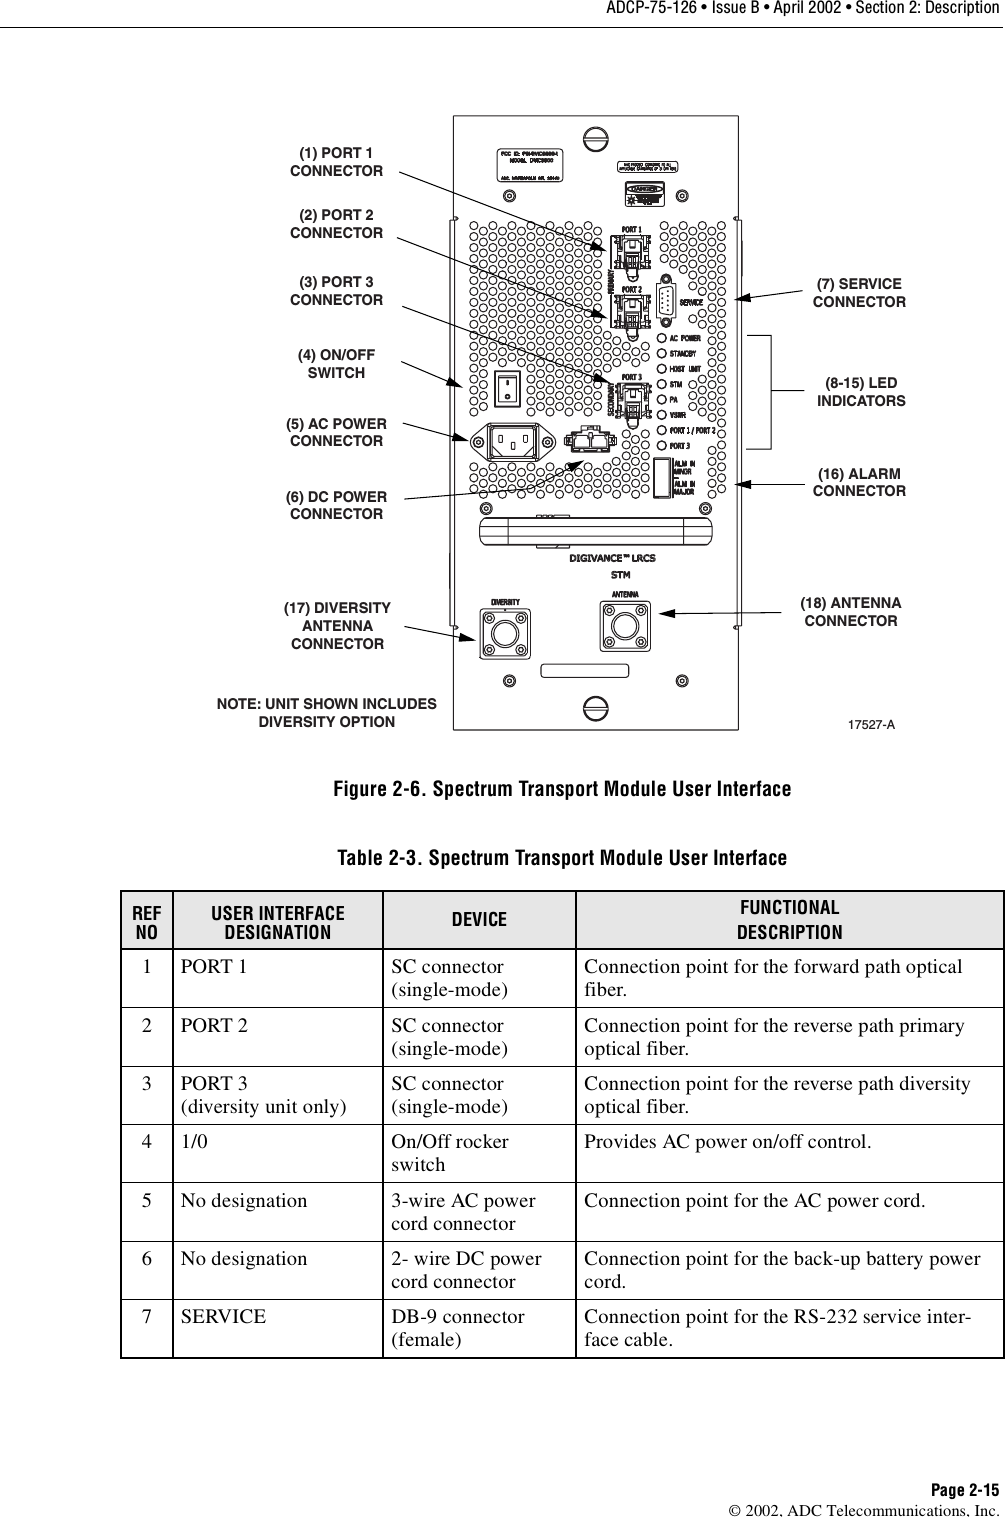 ADCP-75-126 • Issue B • April 2002 • Section 2: DescriptionPage 2-15©2002, ADC Telecommunications, Inc.Figure 2-6. Spectrum Transport Module User InterfaceTable 2-3. Spectrum Transport Module User InterfaceREF NOUSER INTERFACE DESIGNATION DEVICE FUNCTIONALDESCRIPTION1PORT1SCconnector(single-mode) Connection point for the forward path opticalfiber.2PORT2SCconnector(single-mode) Connection point for the reverse path primaryoptical fiber.3PORT3(diversity unit only) SC connector(single-mode) Connection point for the reverse path diversityoptical fiber.41/0 On/Offrockerswitch Provides AC power on/off control.5Nodesignation 3-wire AC powercord connector Connection point for the AC power cord.6Nodesignation 2- wire DC powercord connector Connection point for the back-up battery powercord.7 SERVICE DB-9 connector(female) Connection point for the RS-232 service inter-face cable.17527-A(4) ON/OFFSWITCH(5) AC POWERCONNECTOR(6) DC POWERCONNECTOR(1) PORT 1CONNECTOR(2) PORT 2CONNECTOR(3) PORT 3CONNECTORNOTE: UNIT SHOWN INCLUDESDIVERSITY OPTION(7) SERVICECONNECTOR(8-15) LEDINDICATORS(16) ALARMCONNECTOR(17) DIVERSITYANTENNACONNECTOR(18) ANTENNACONNECTOR